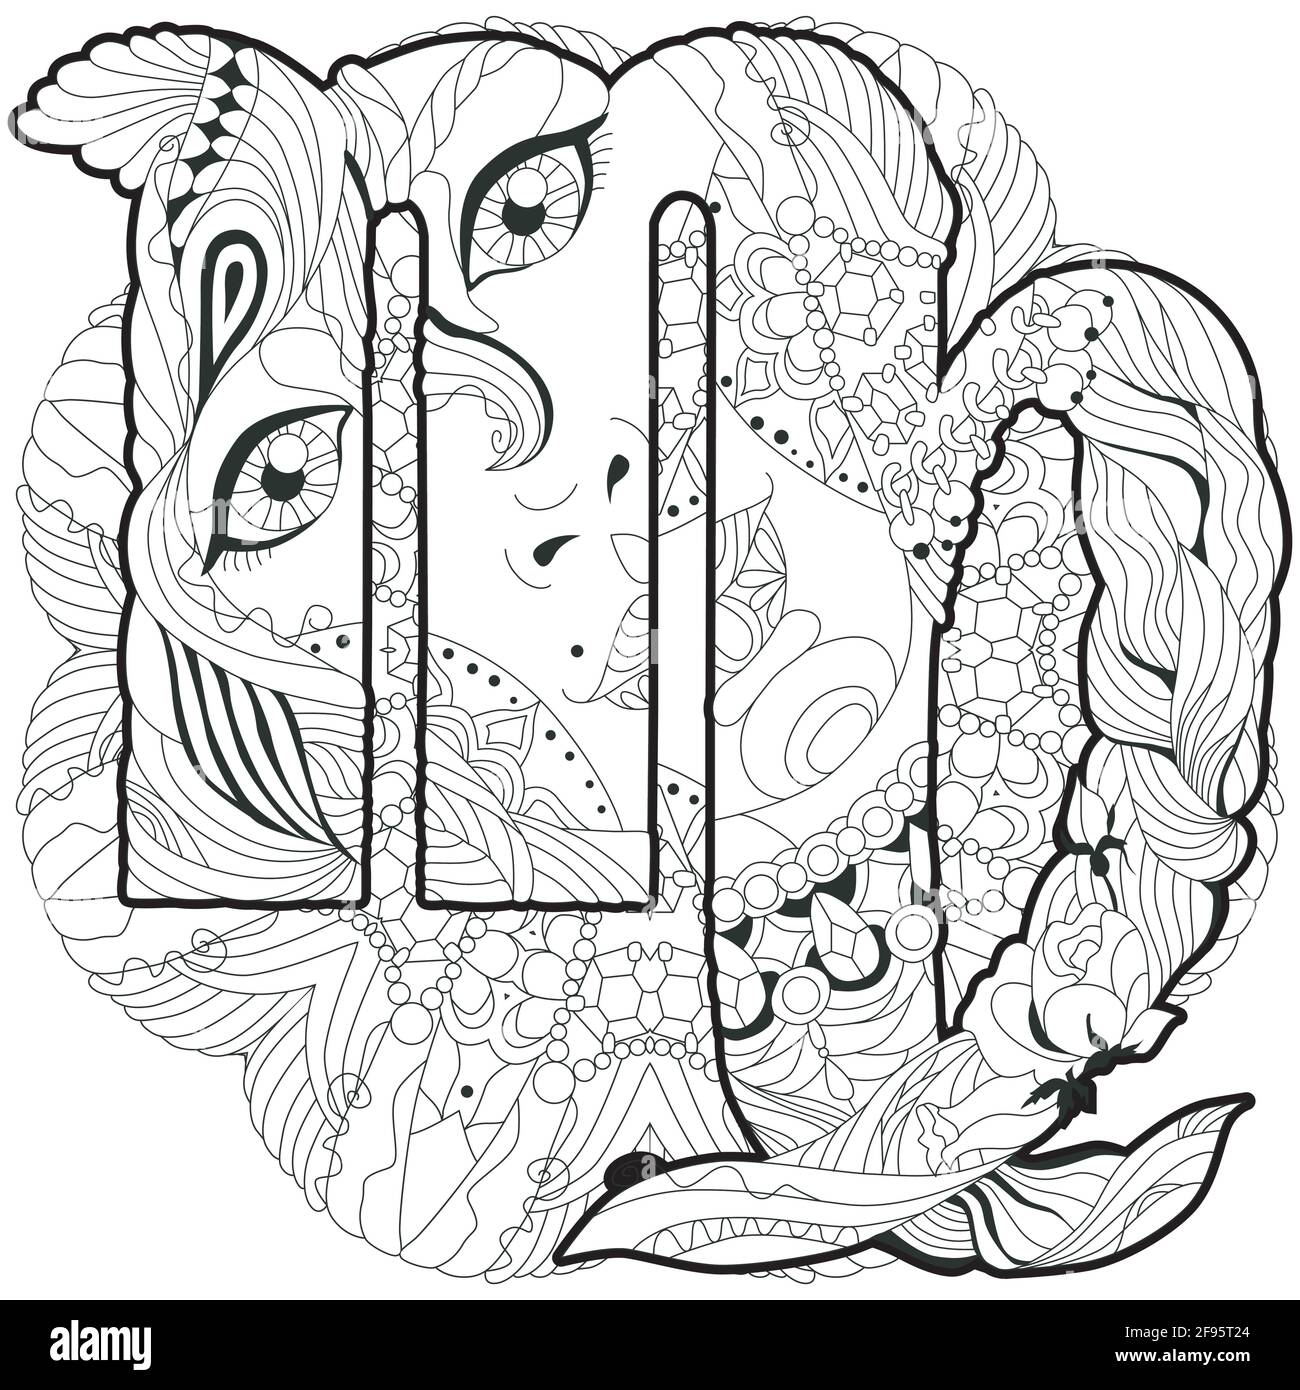 Virgo zodiac sign with mandala, astrology concept art. Tattoo design. For coloring pages Stock Vector